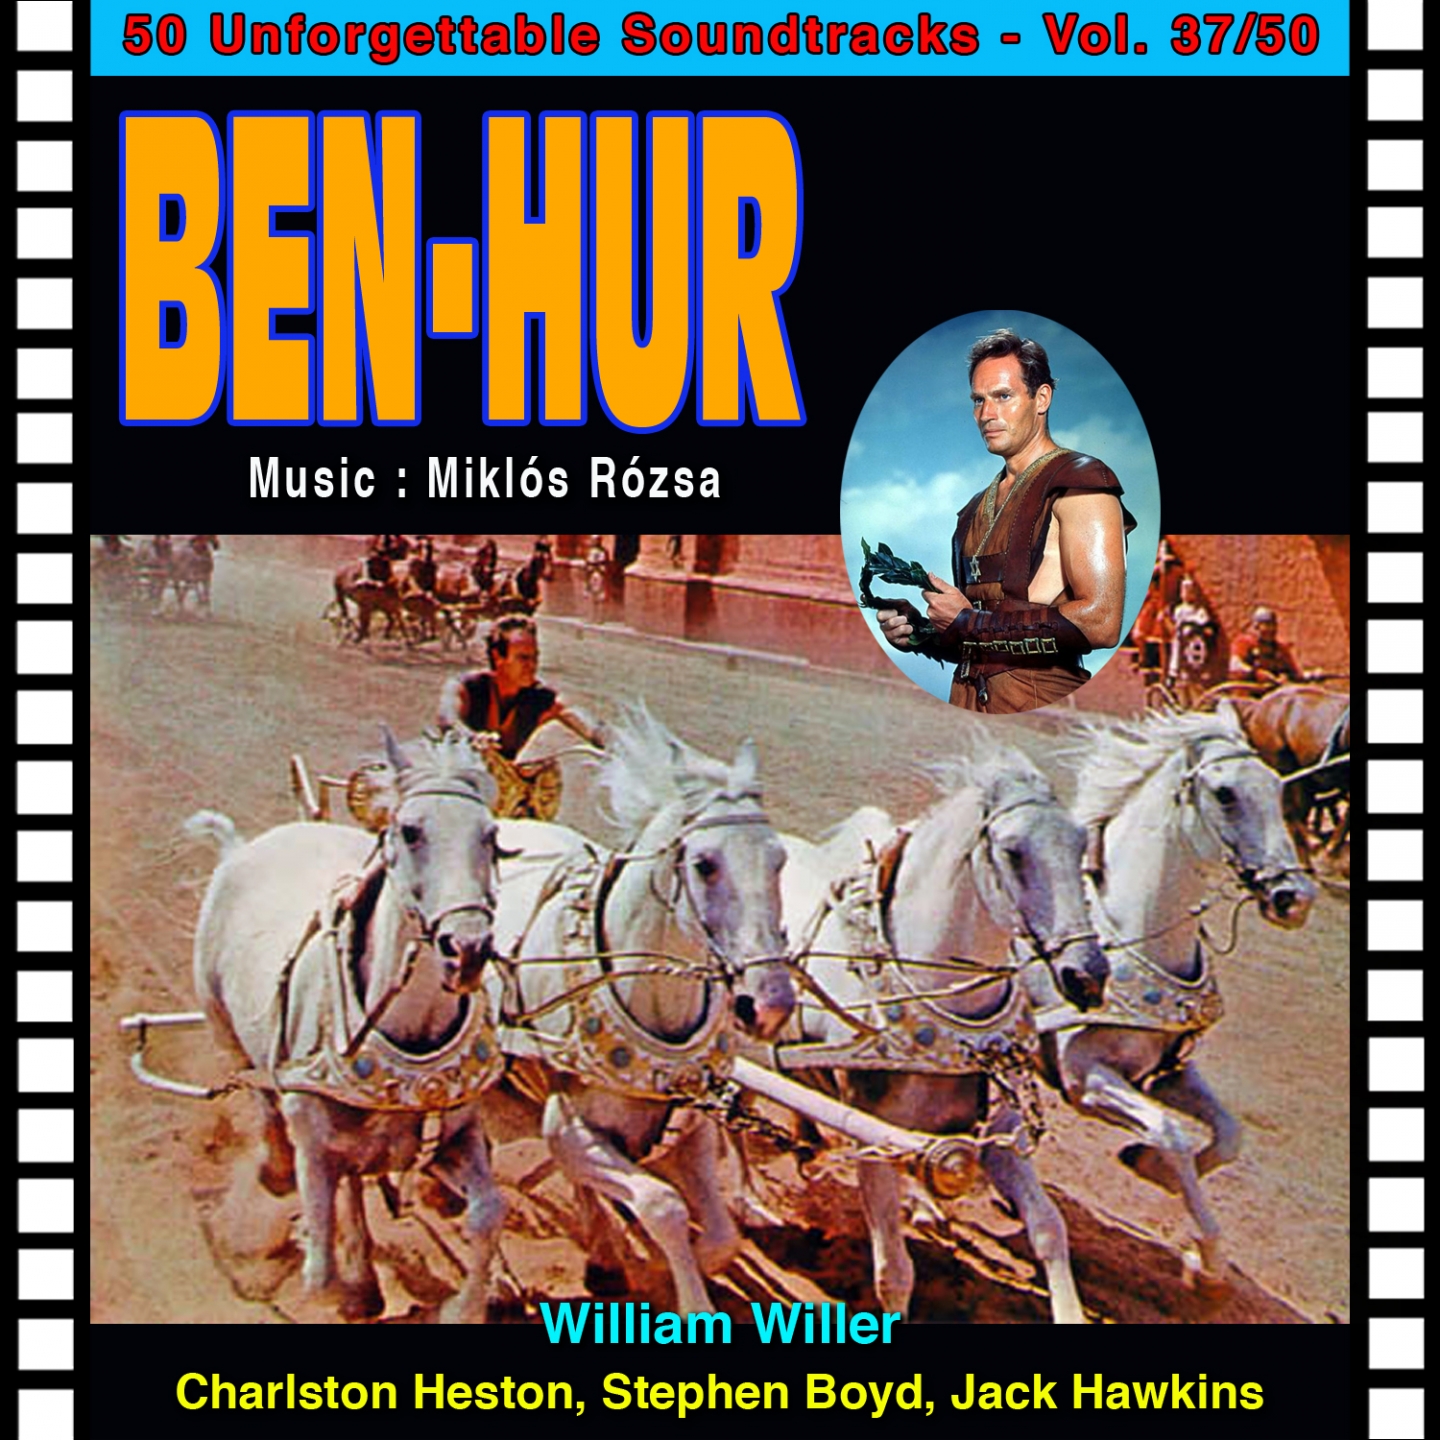 Leper's Search for the Christ (Ben-Hur)